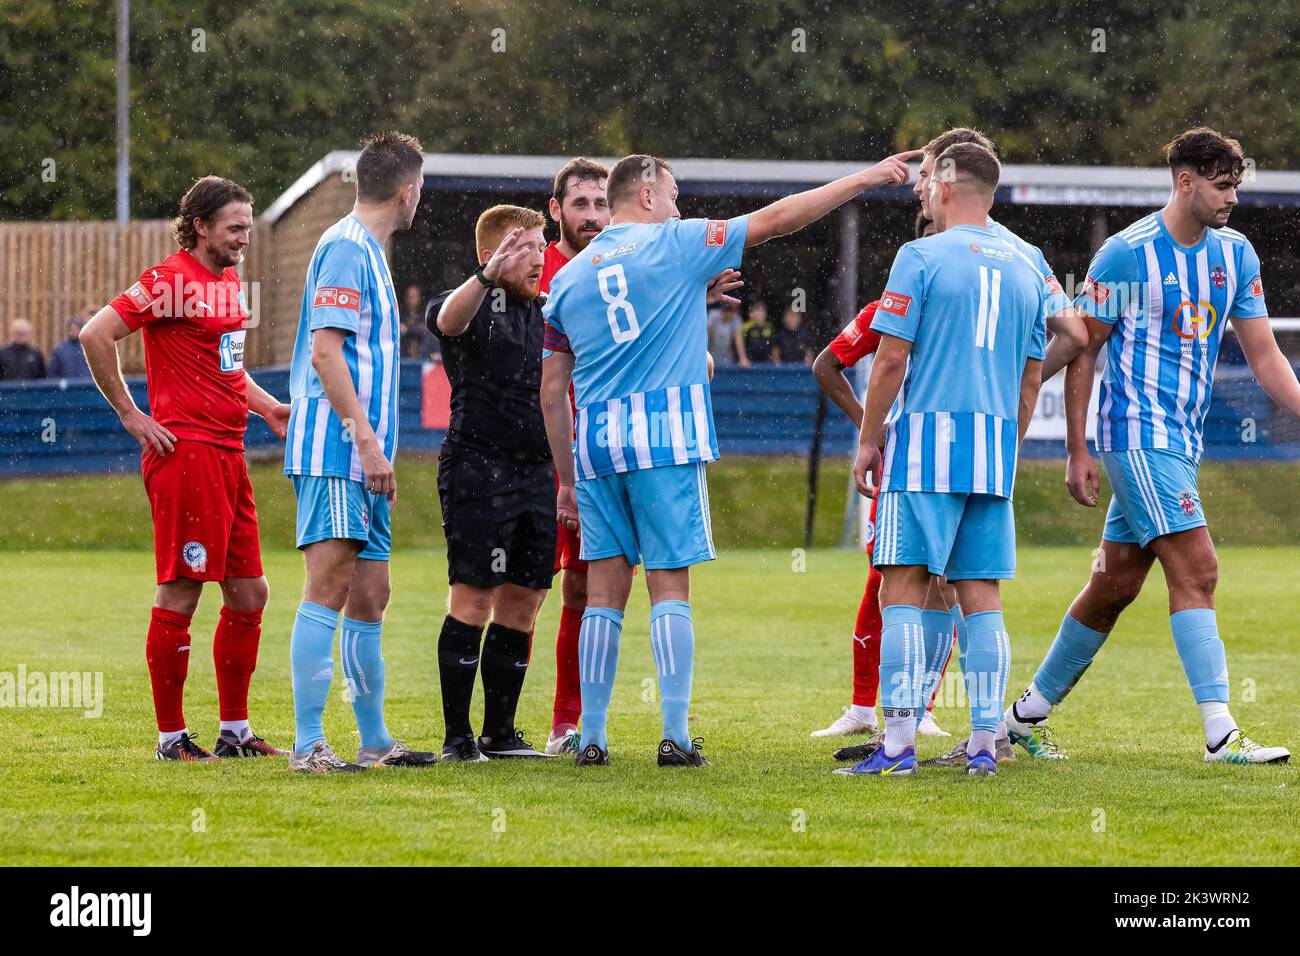 Liversedge hosted Warrington Rylands for a football match in the Northern Premier League Premier Division. Liversedge players surround the referee Stock Photo